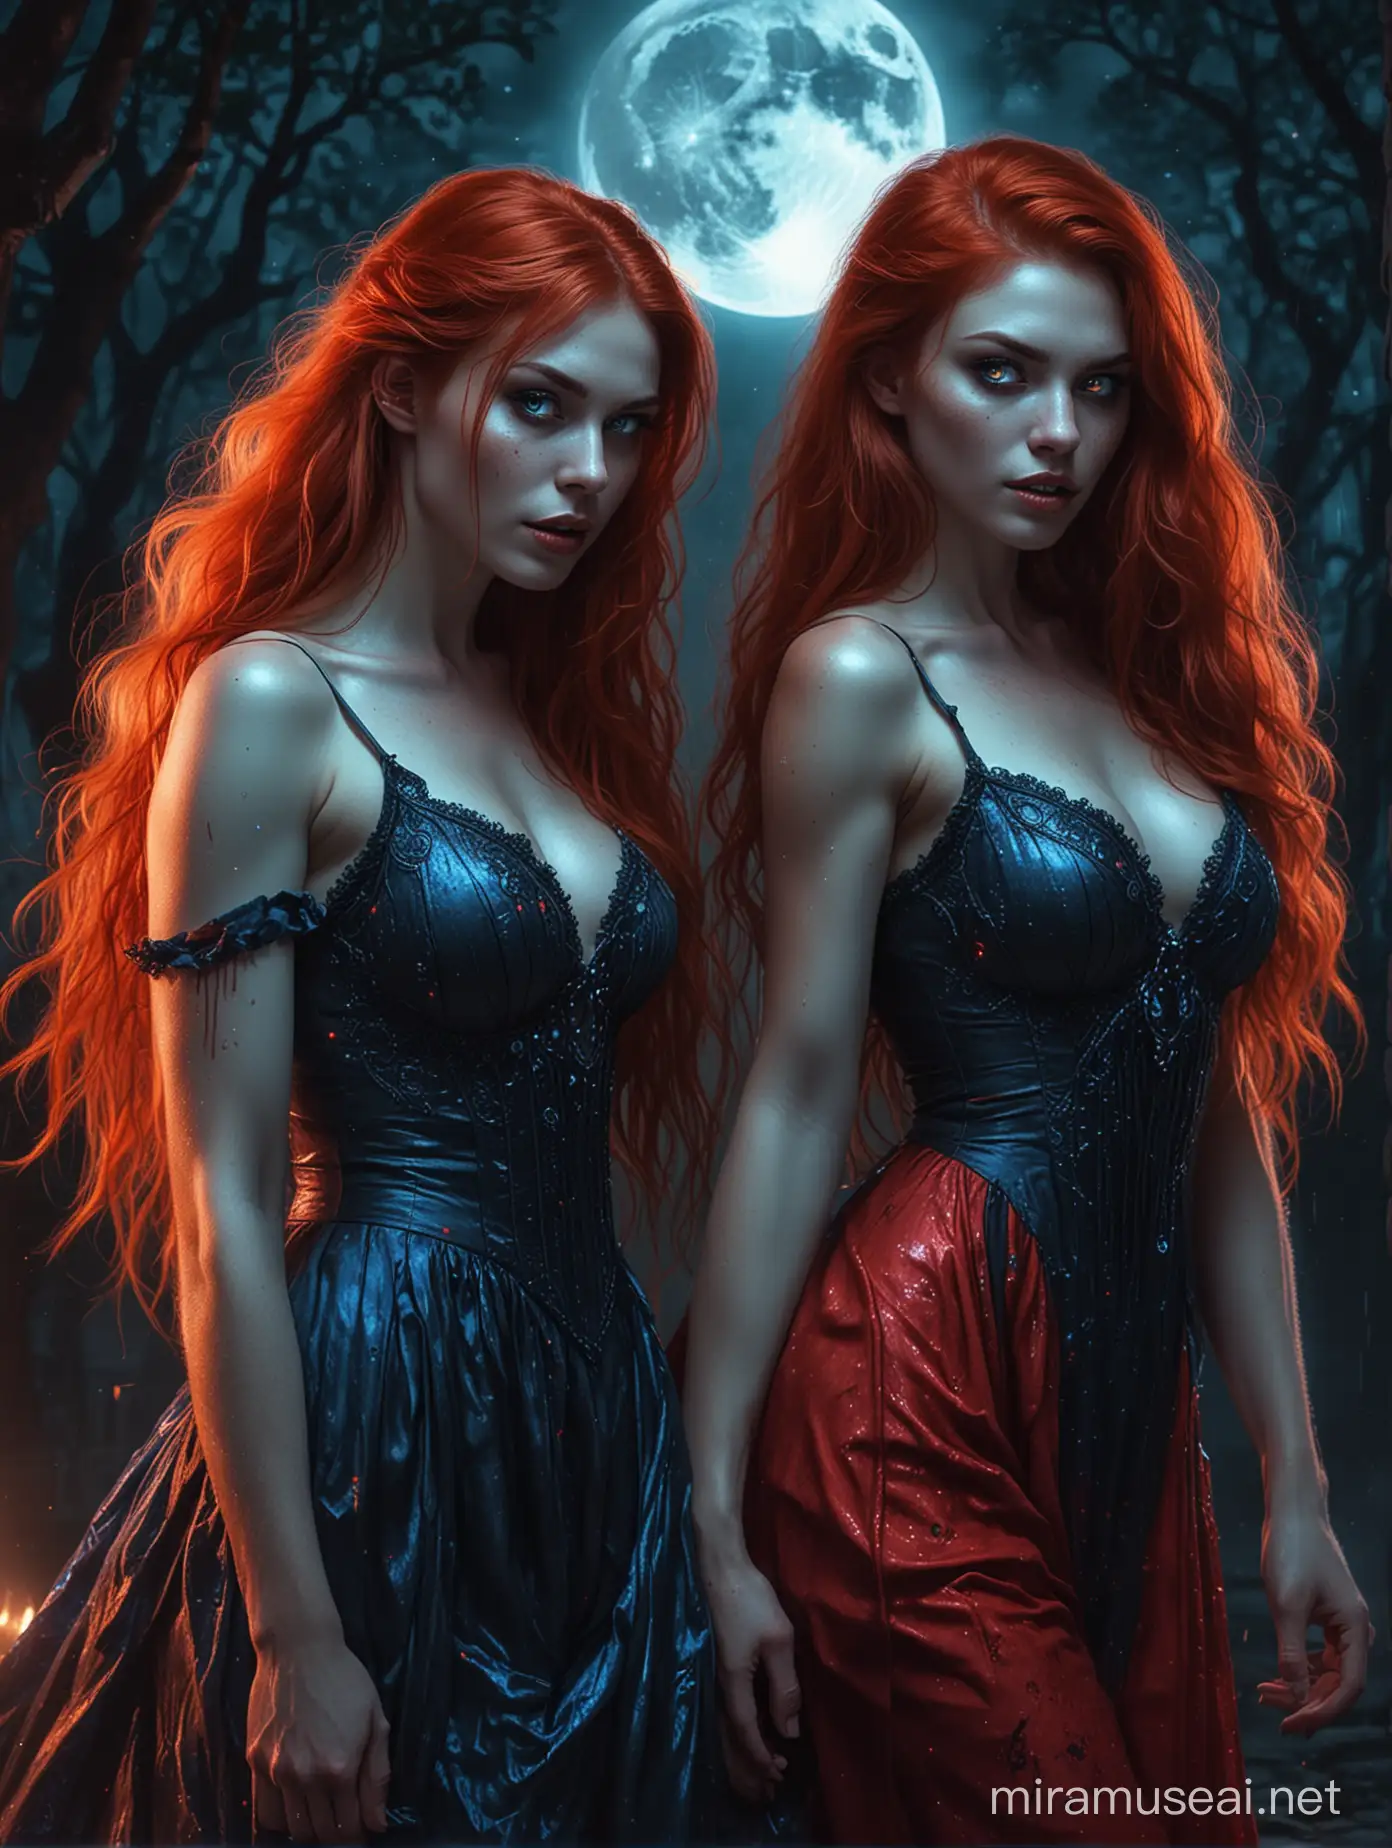 Red and Blue Glowing Goddesses BacktoBack Against a Creepy Werewolf in Moonlit Night